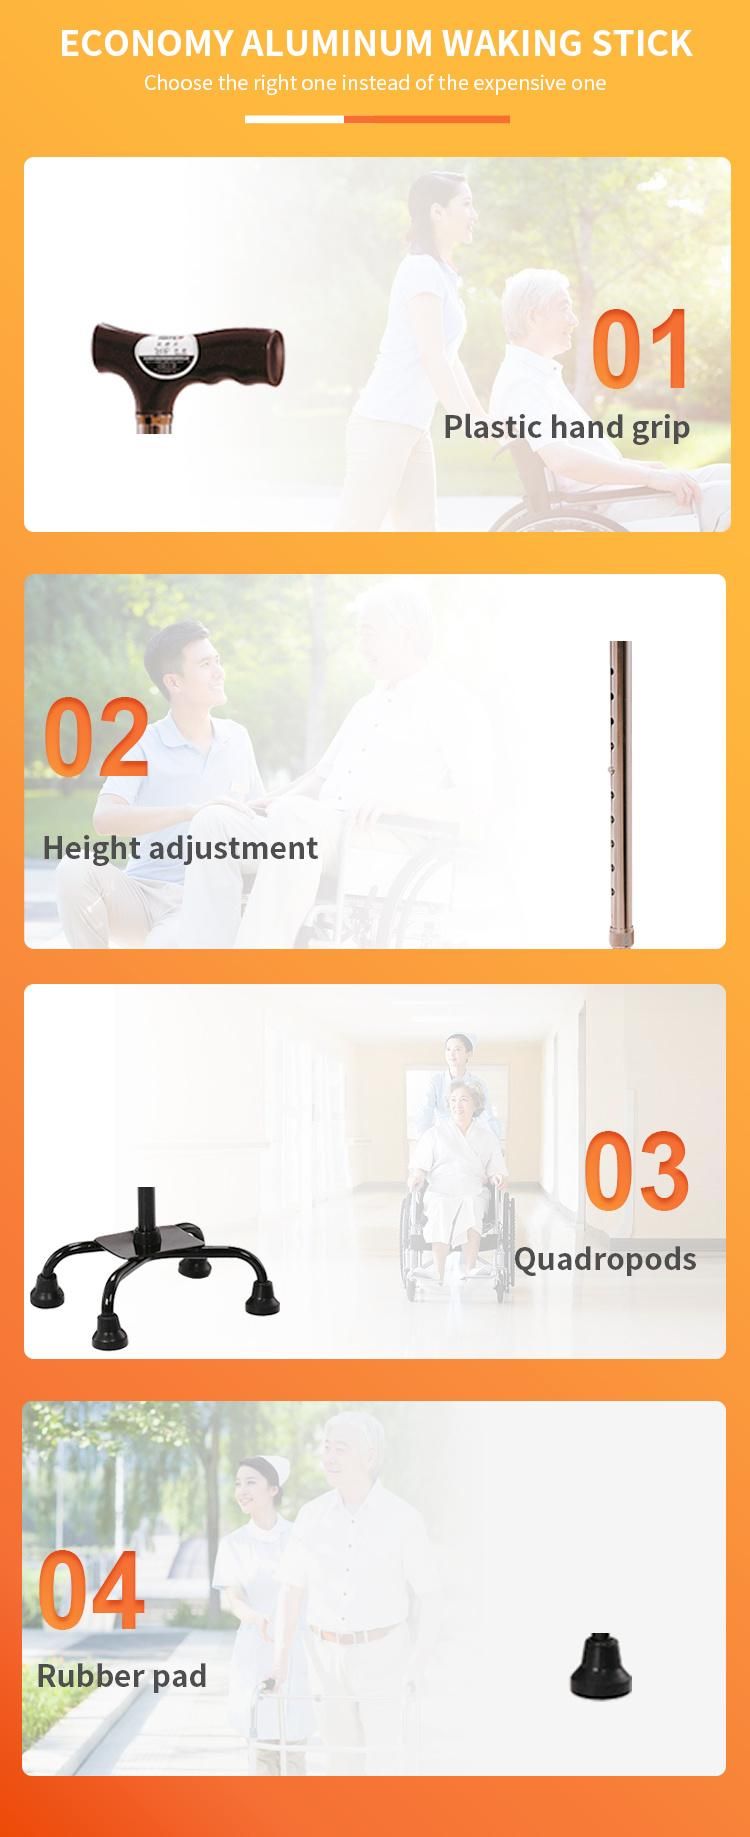 Steel Based Height Adjustable Cane Quad Cane Aluminum Alloy Walking Stick Quadropods Bronze for Elderly People with Limited Mobility